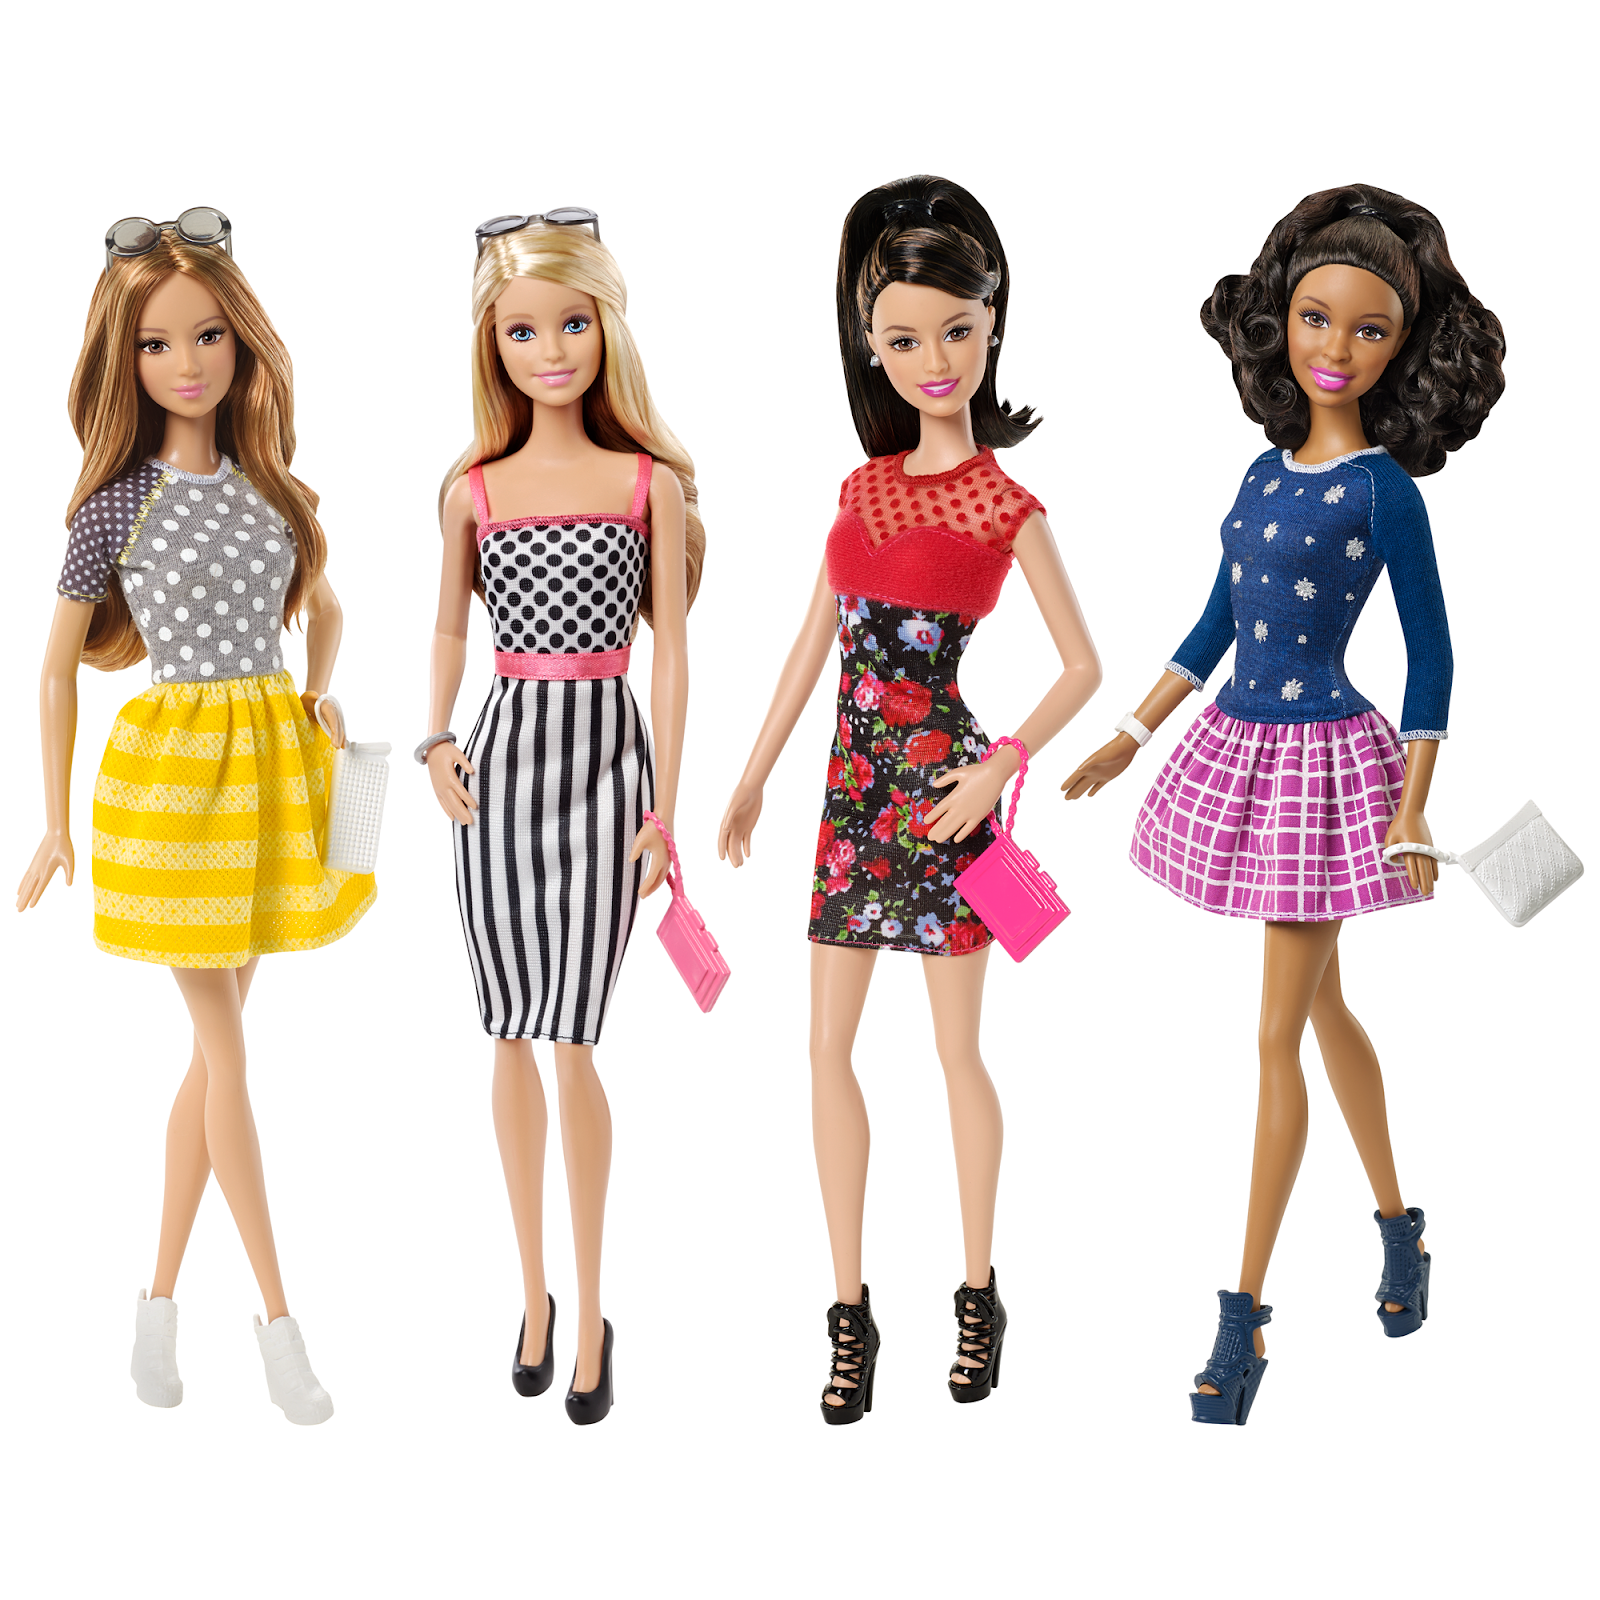 Barbie collections. Барби фашионистас 2015. Коллекция Барби фашионистас. Куклы Барби фашионистас 2015. Барби фашионистас 3.